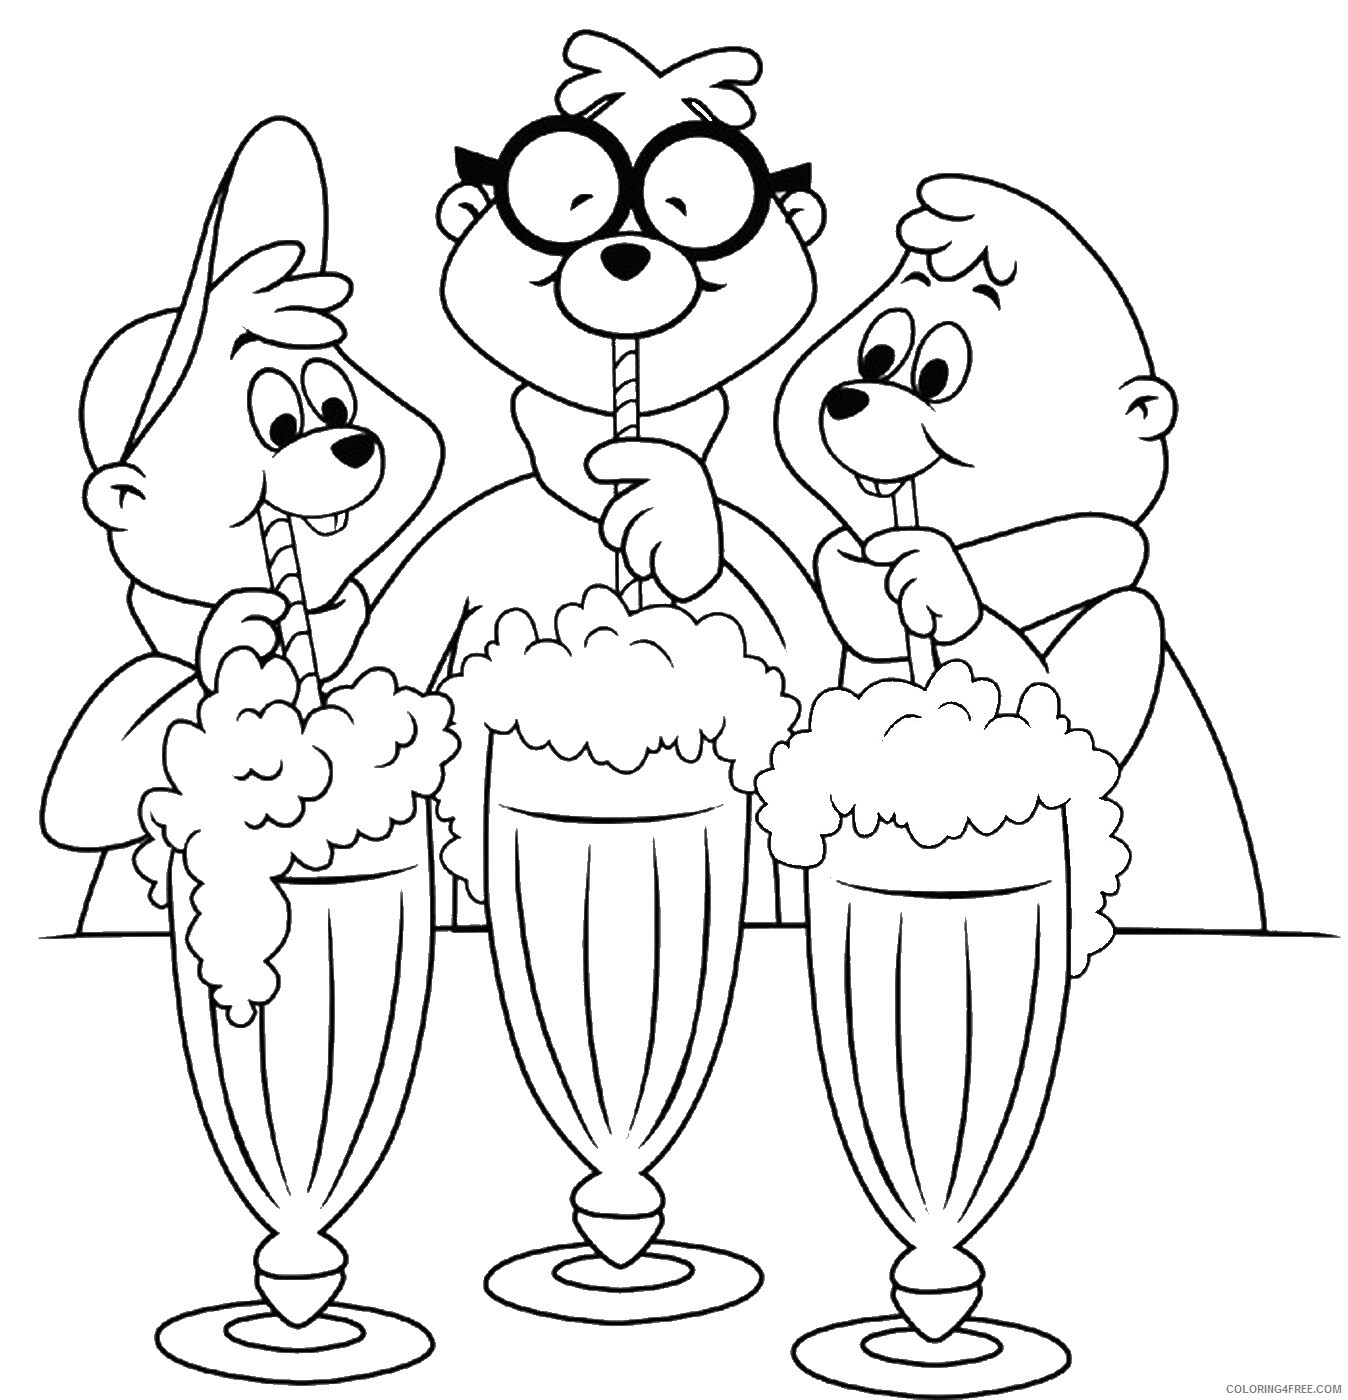 Ice Cream Coloring Pages for Kids icecream_24 Printable 2021 366 Coloring4free